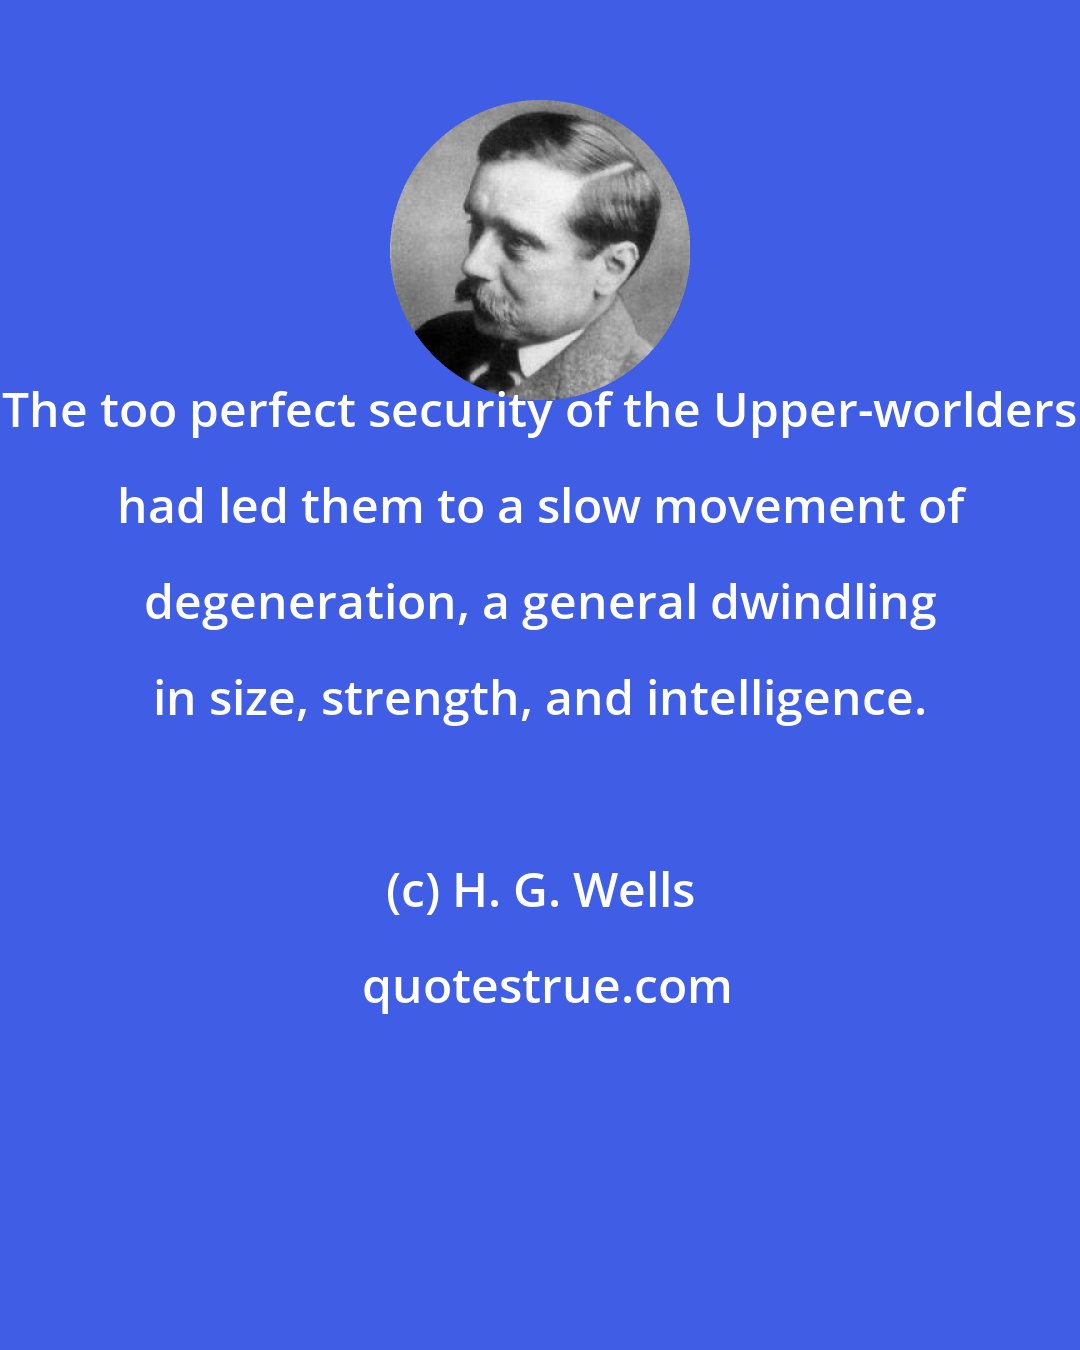 H. G. Wells: The too perfect security of the Upper-worlders had led them to a slow movement of degeneration, a general dwindling in size, strength, and intelligence.